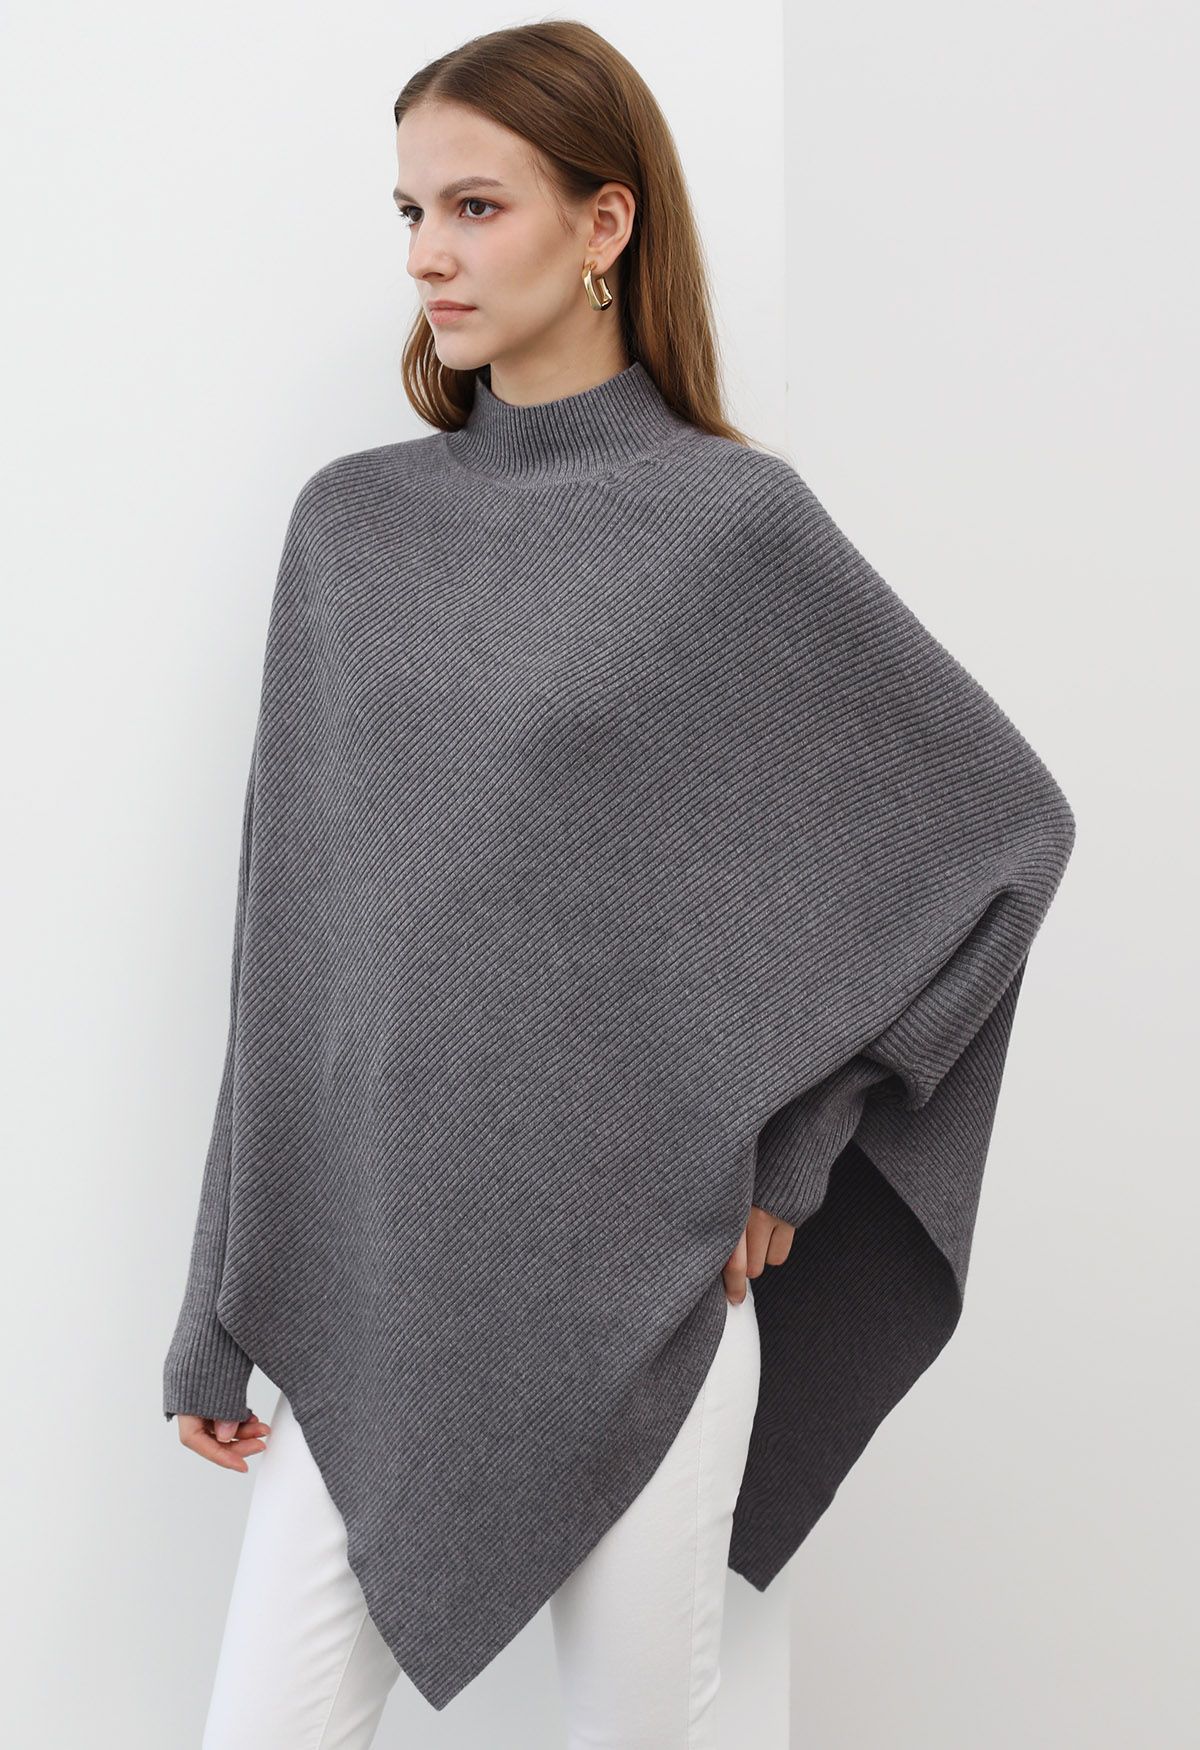 Asymmetric Batwing Sleeve Ribbed Knit Poncho in Grey - Retro, Indie and ...